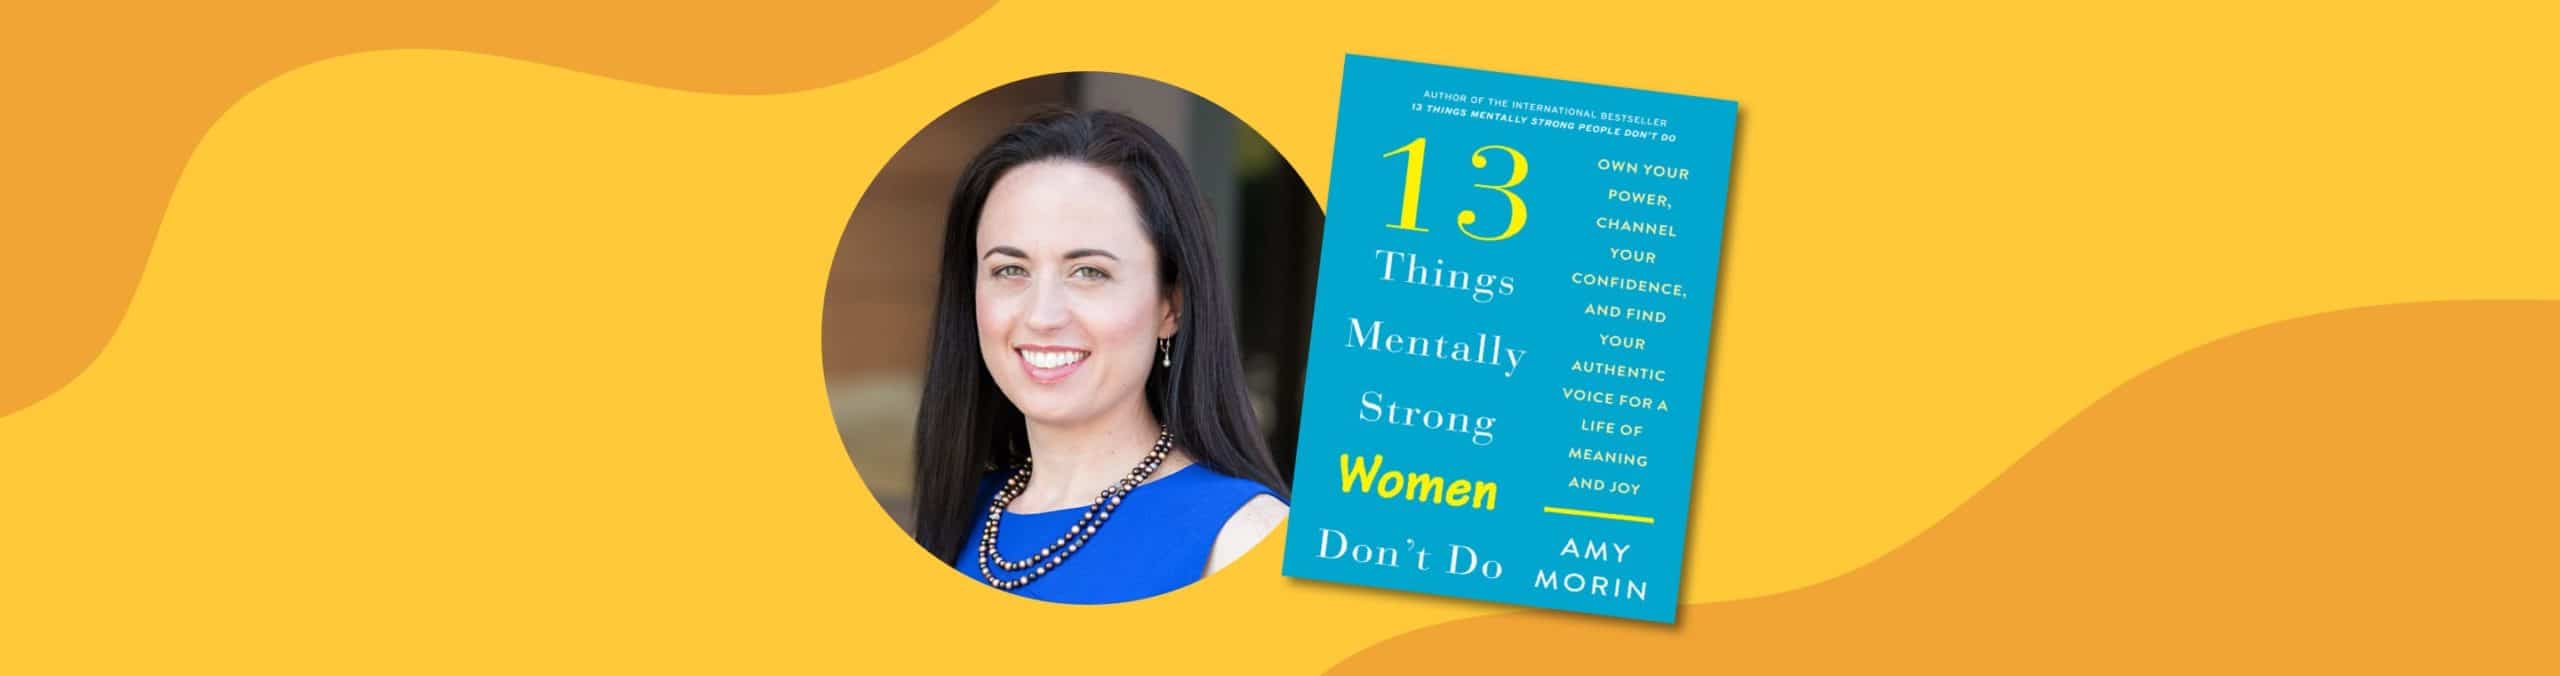 Author Amy Morin on how to be mentally strong